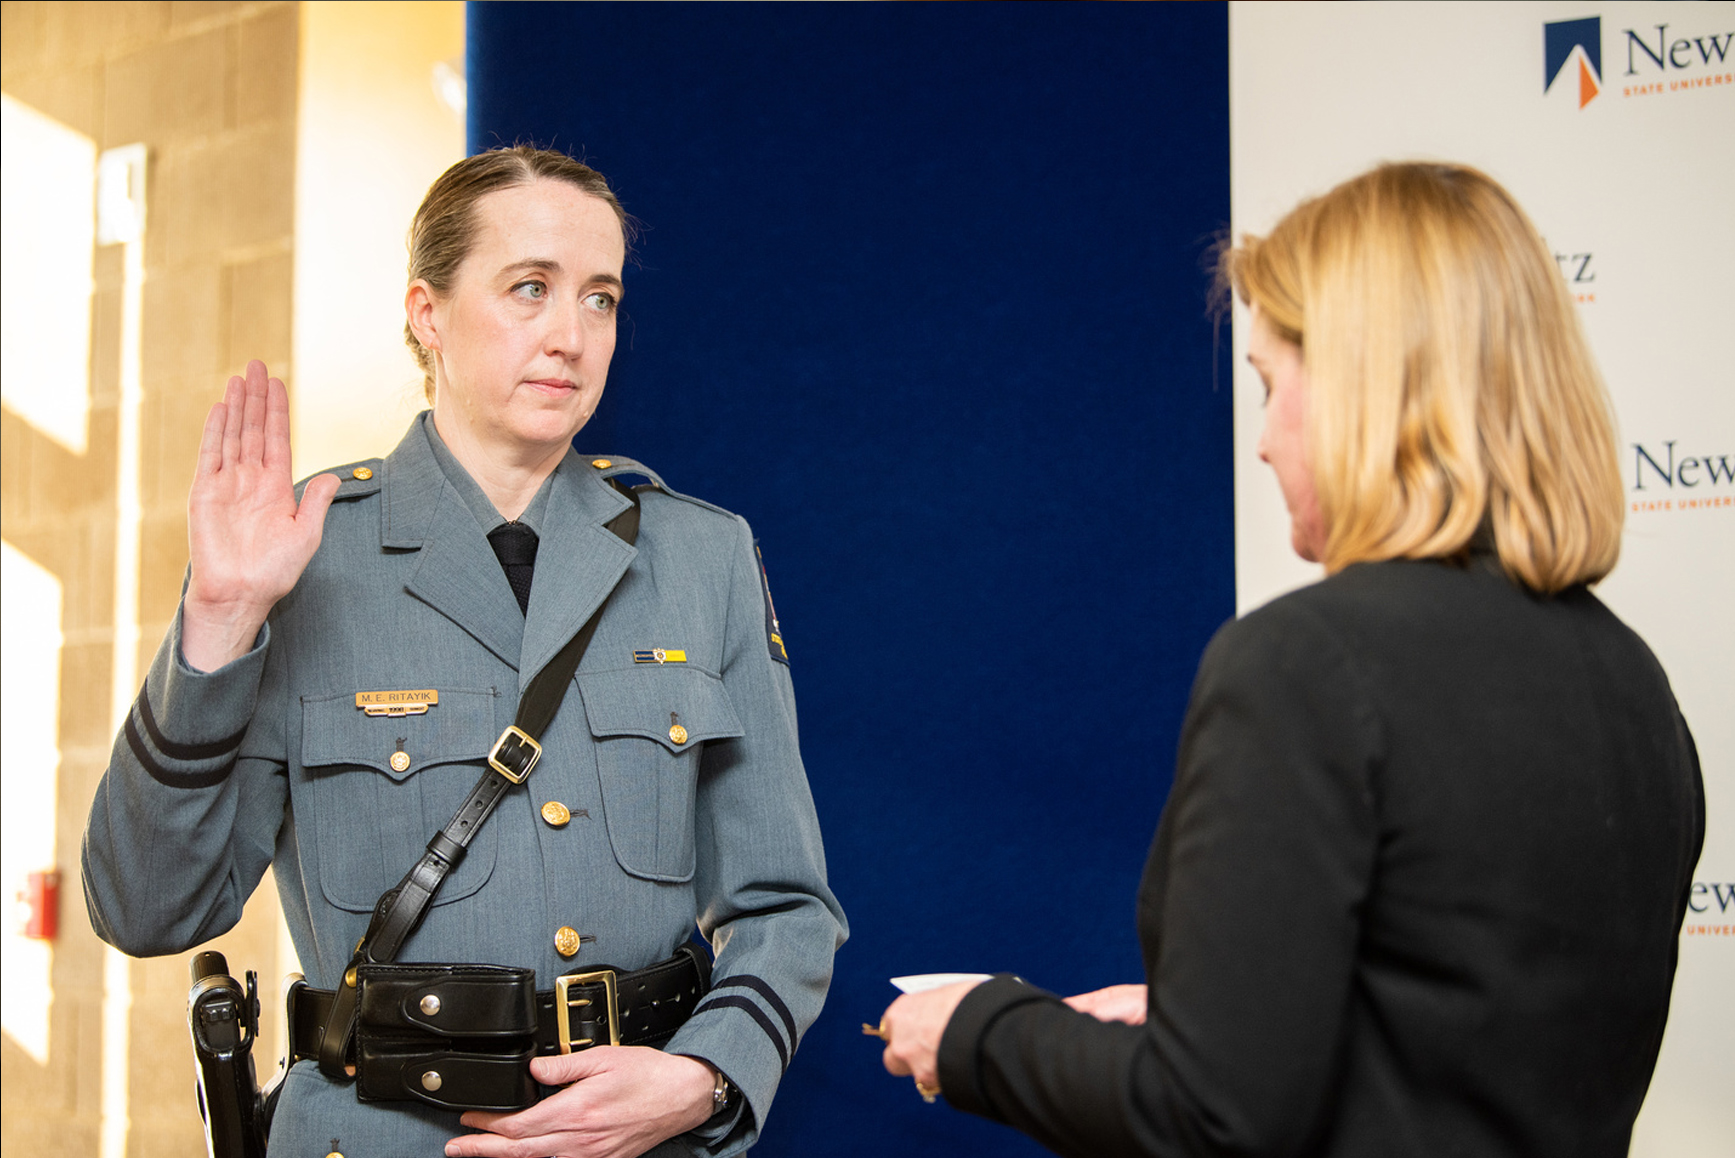 SUNY New Paltz announced the appointment of Mary Ritayik as Chief of the University Police Department (UPD), effective Jan. 1, 2019